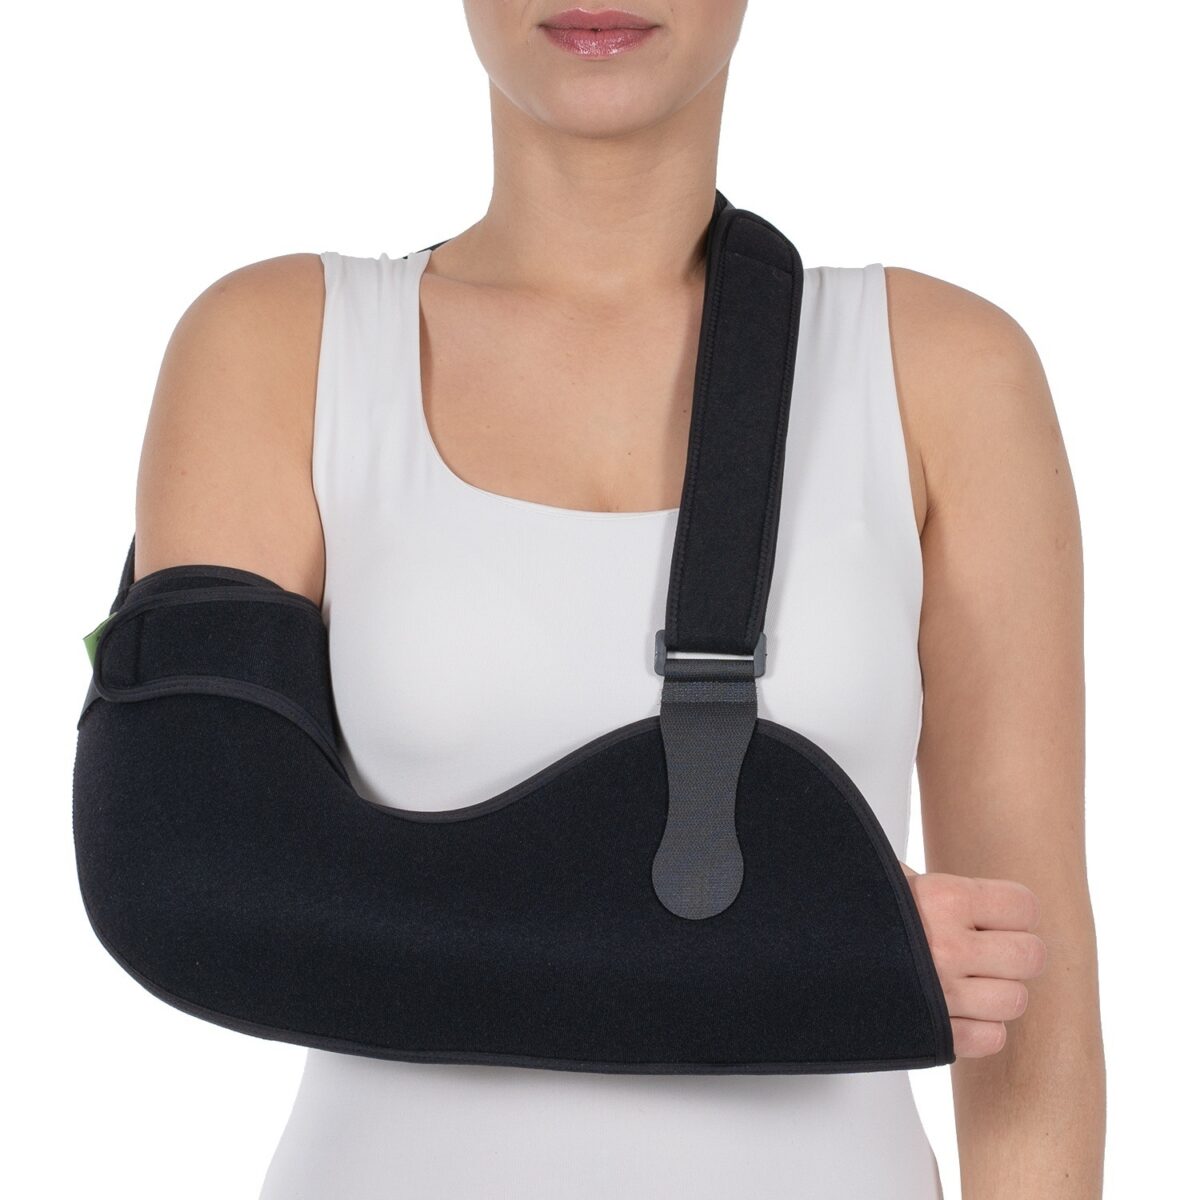 wingmed orthopedic equipments W211 arm sling with additionnal belt lux 2